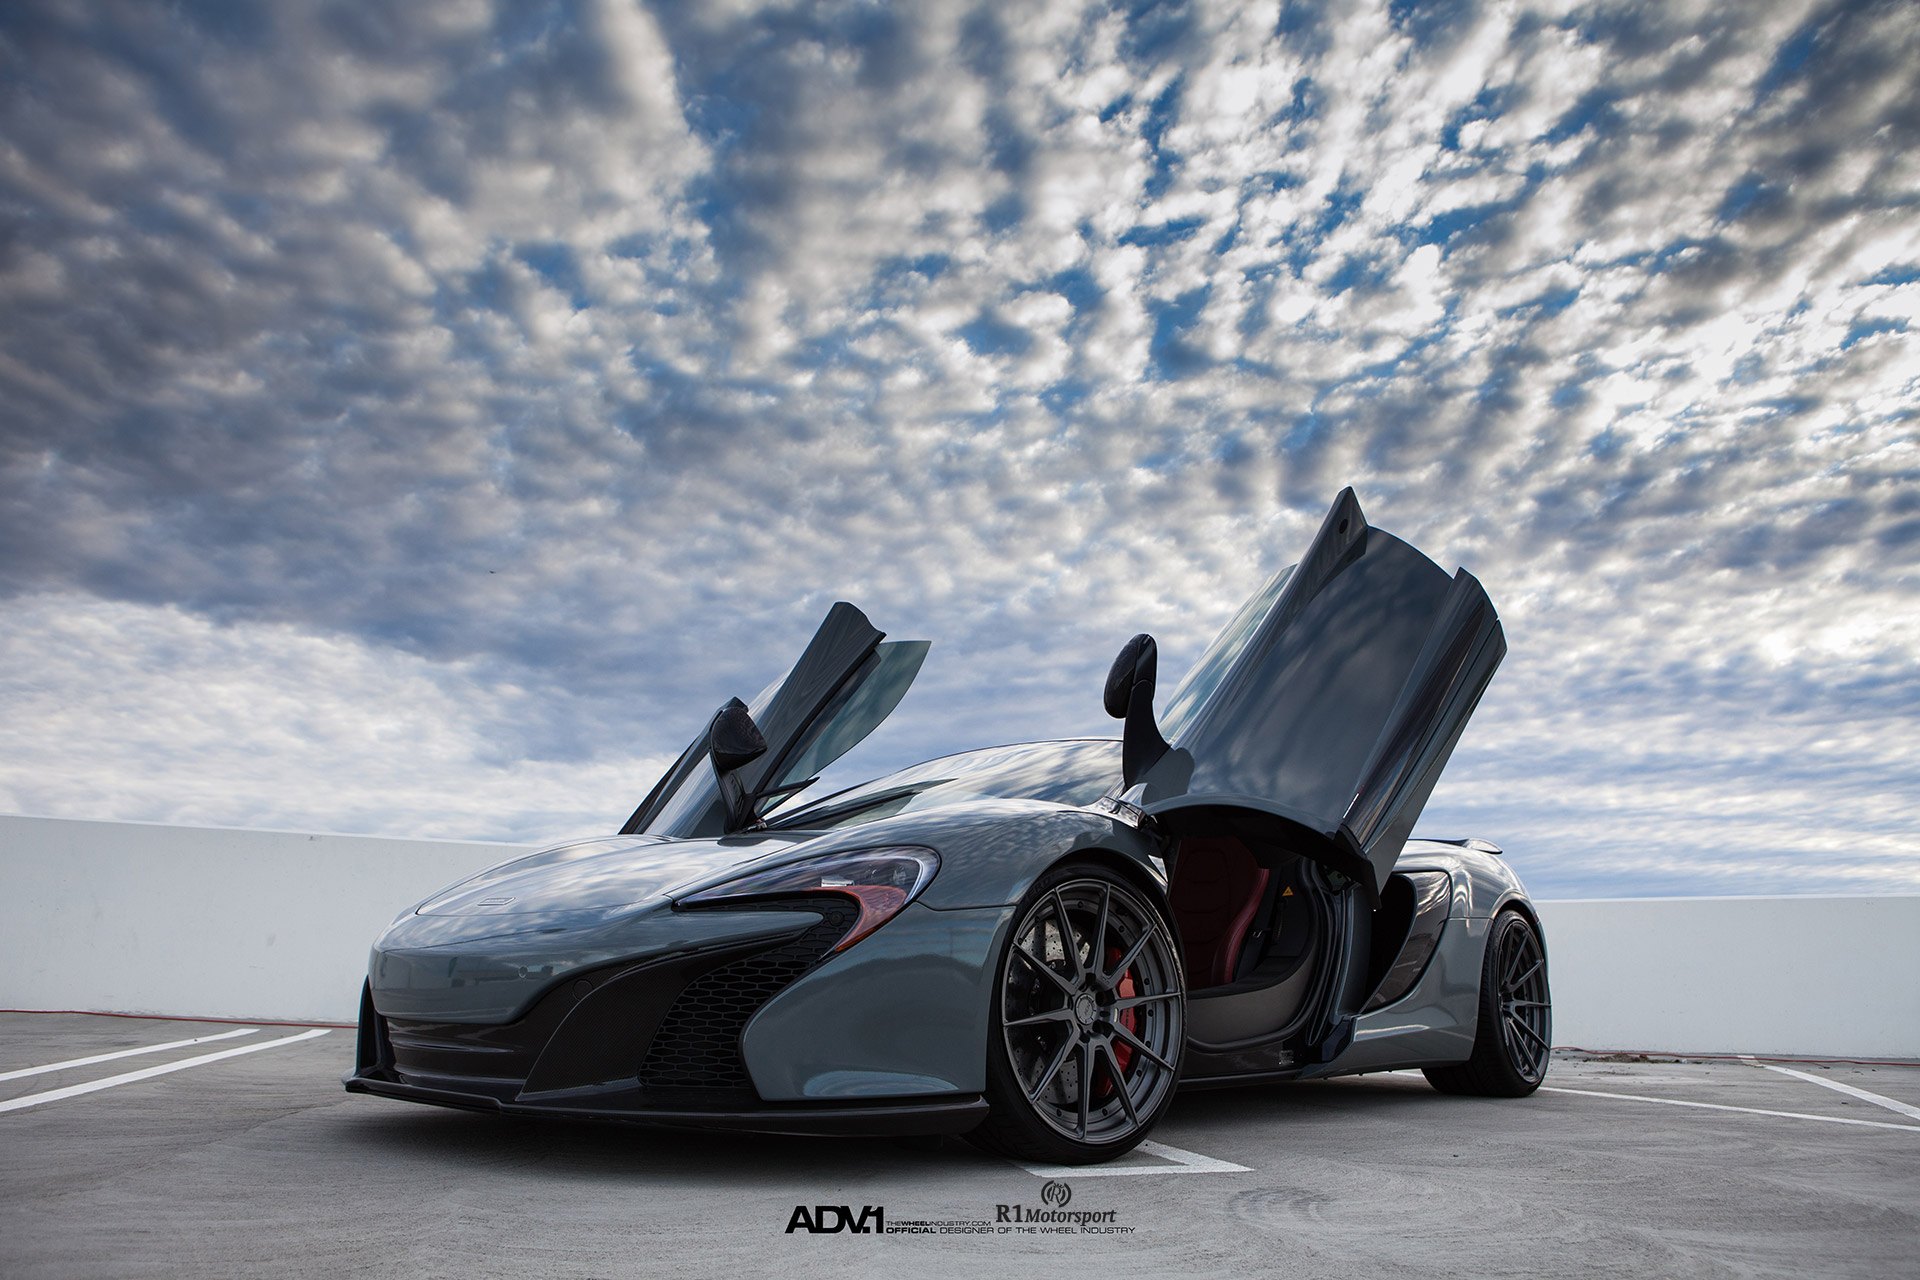 Millionaire Club - Mclaren 650s With Aftermarket Wheels - Photo by ADV.1